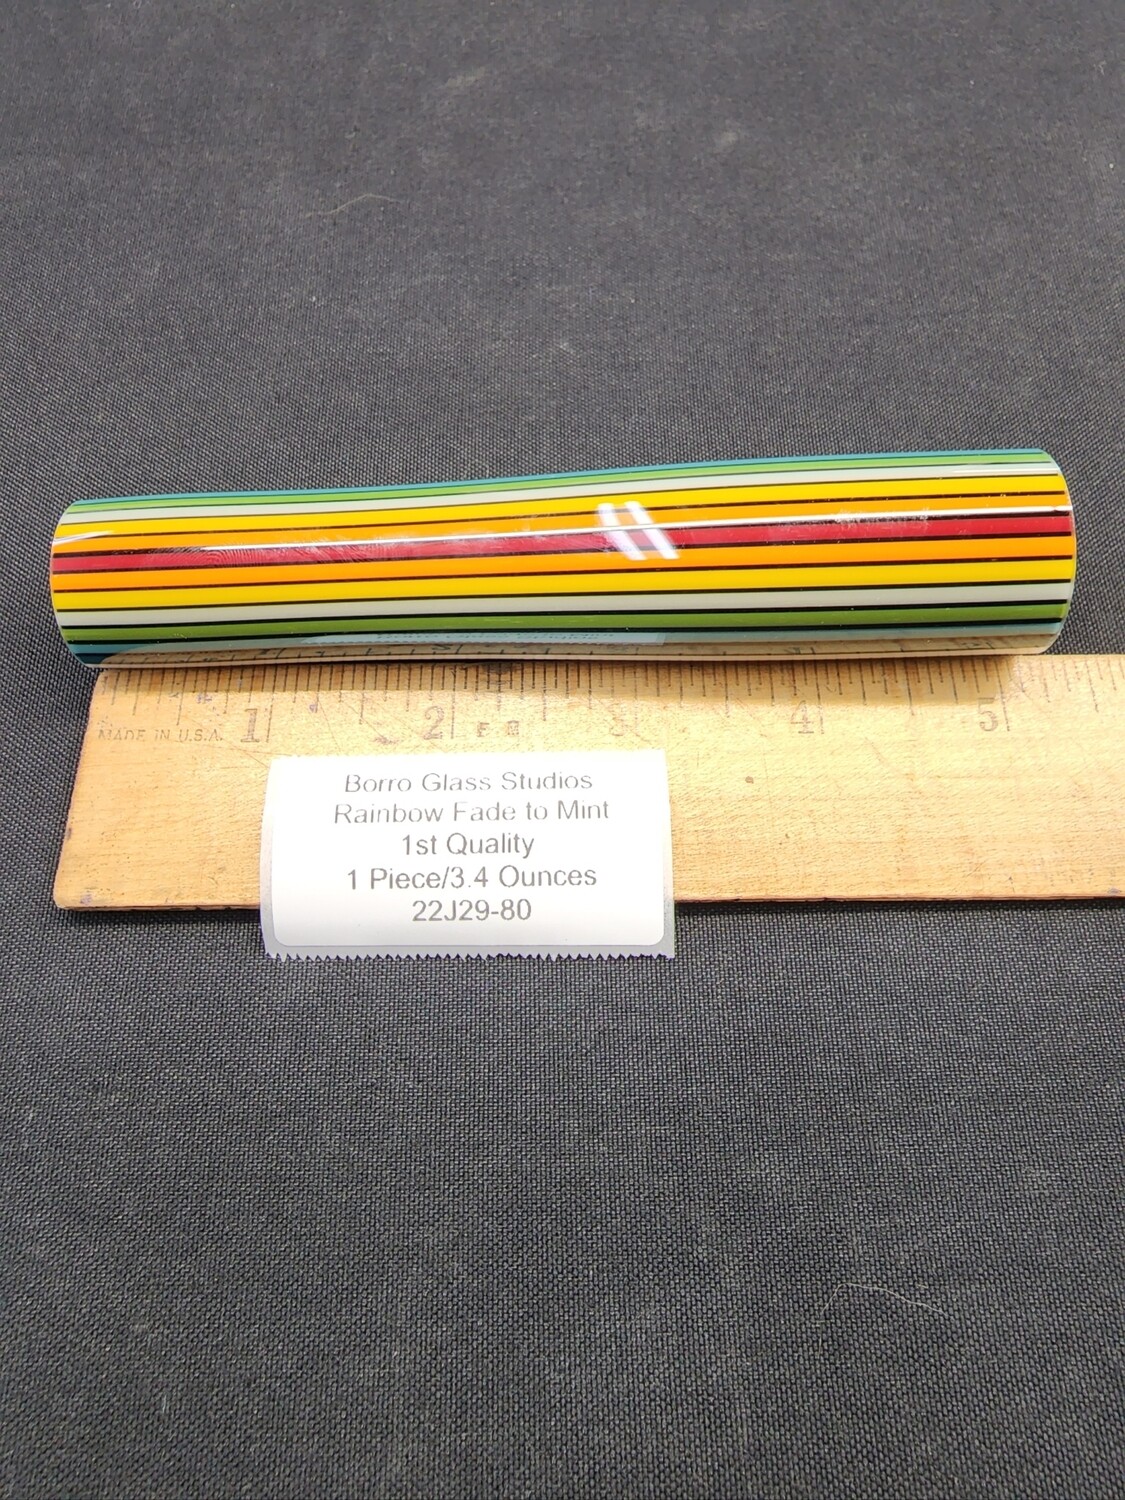 Rainbow Fade to Mint Borro Vac Stacked Line Tubing - 1st Quality - 3.4 Ounces